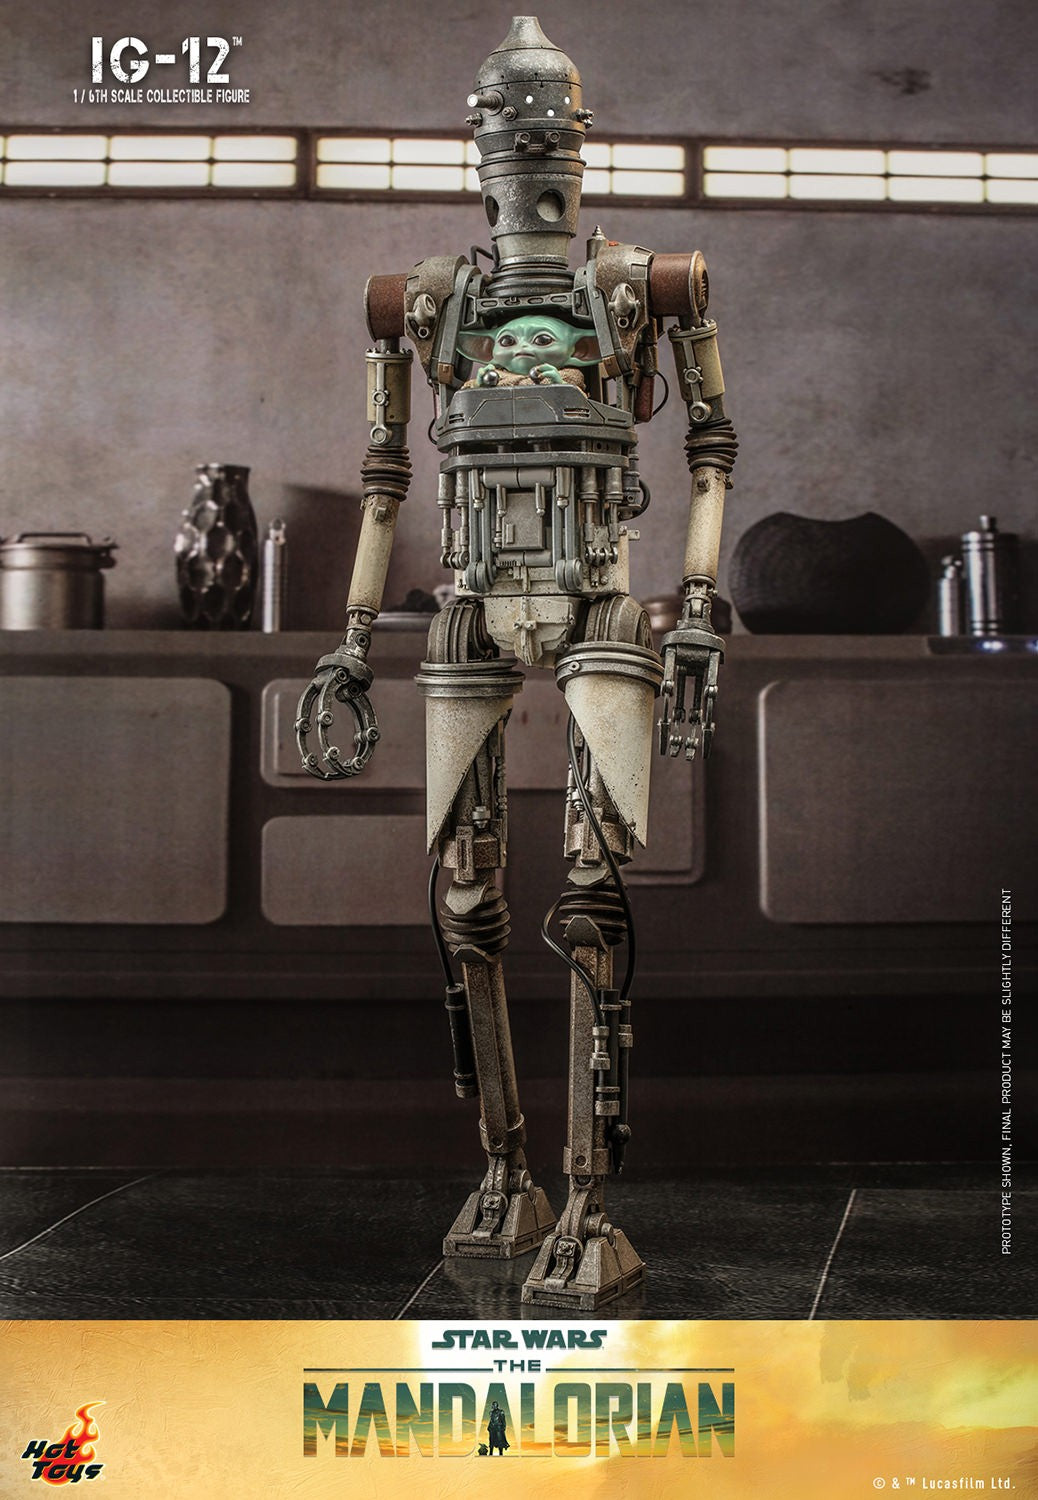 IG-12: With Accessories: Star Wars: The Mandalorian: Hot Toys